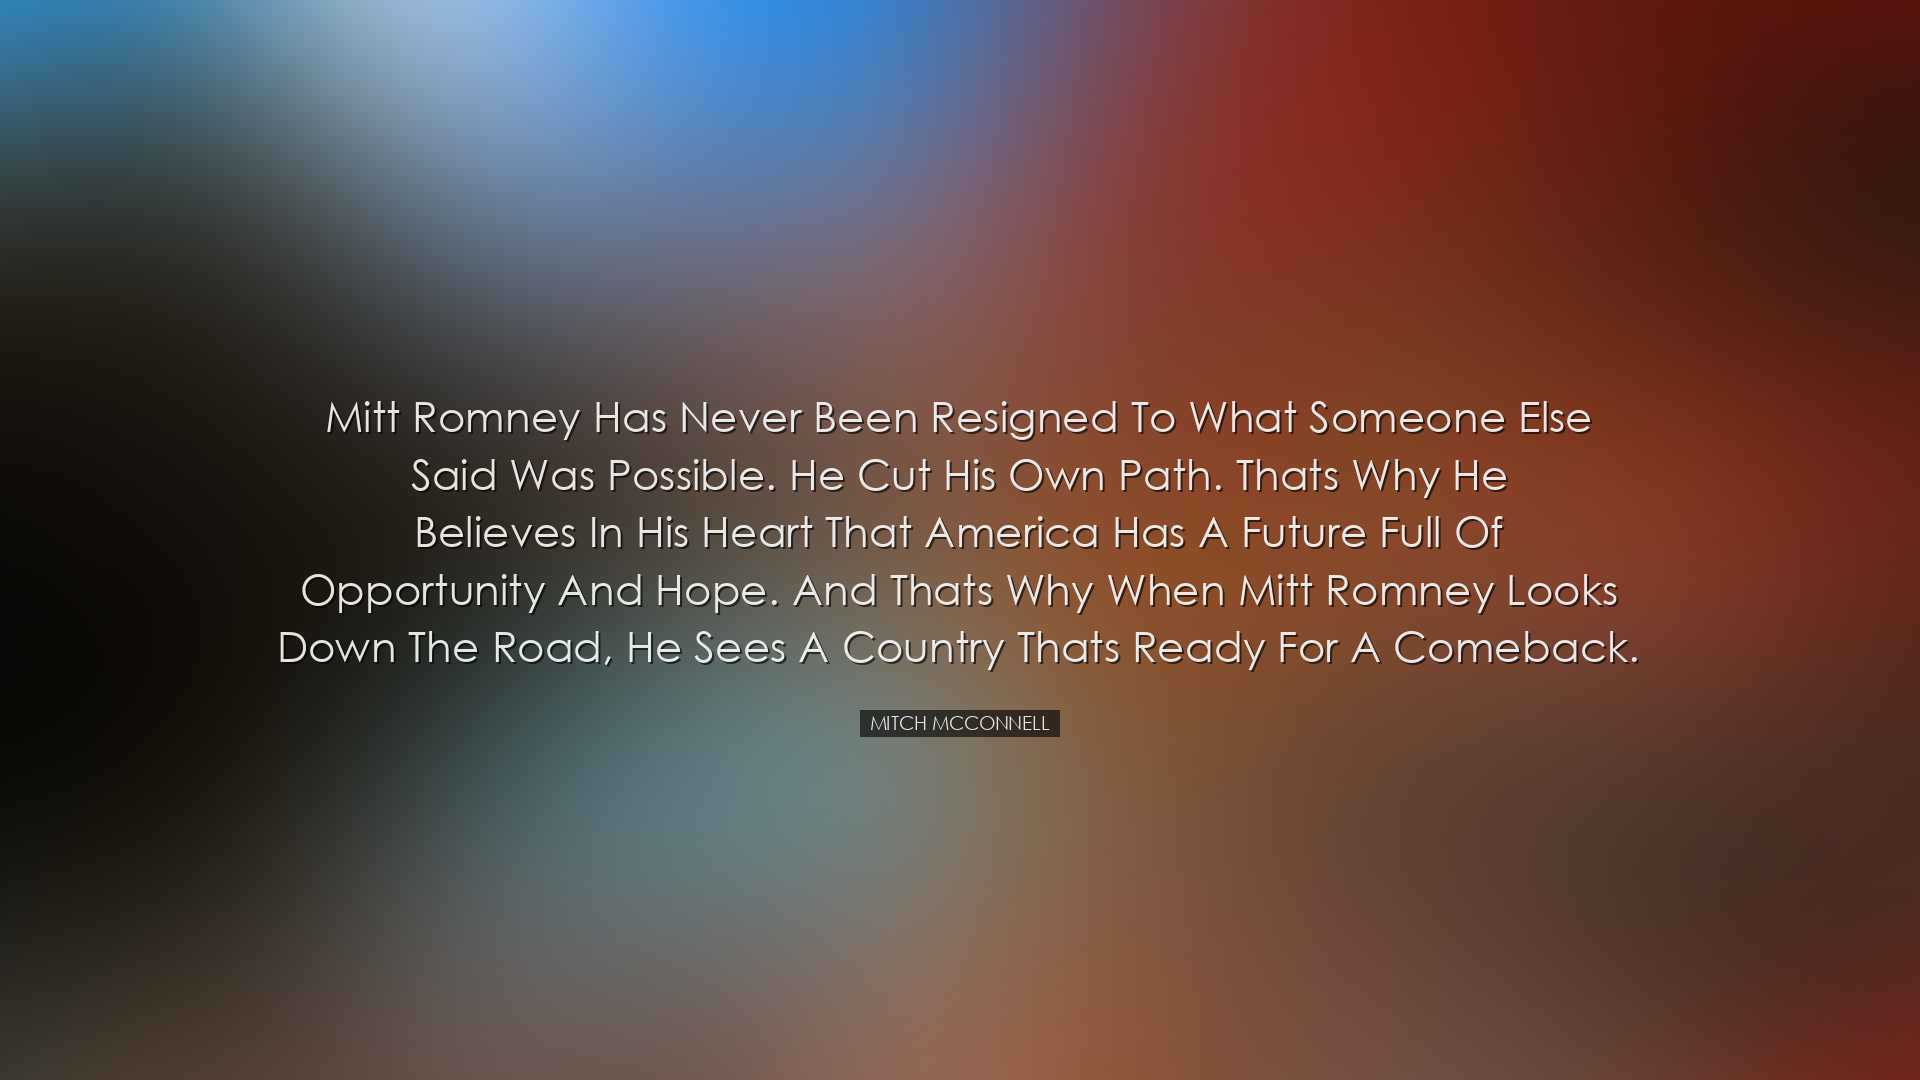 Mitt Romney has never been resigned to what someone else said was